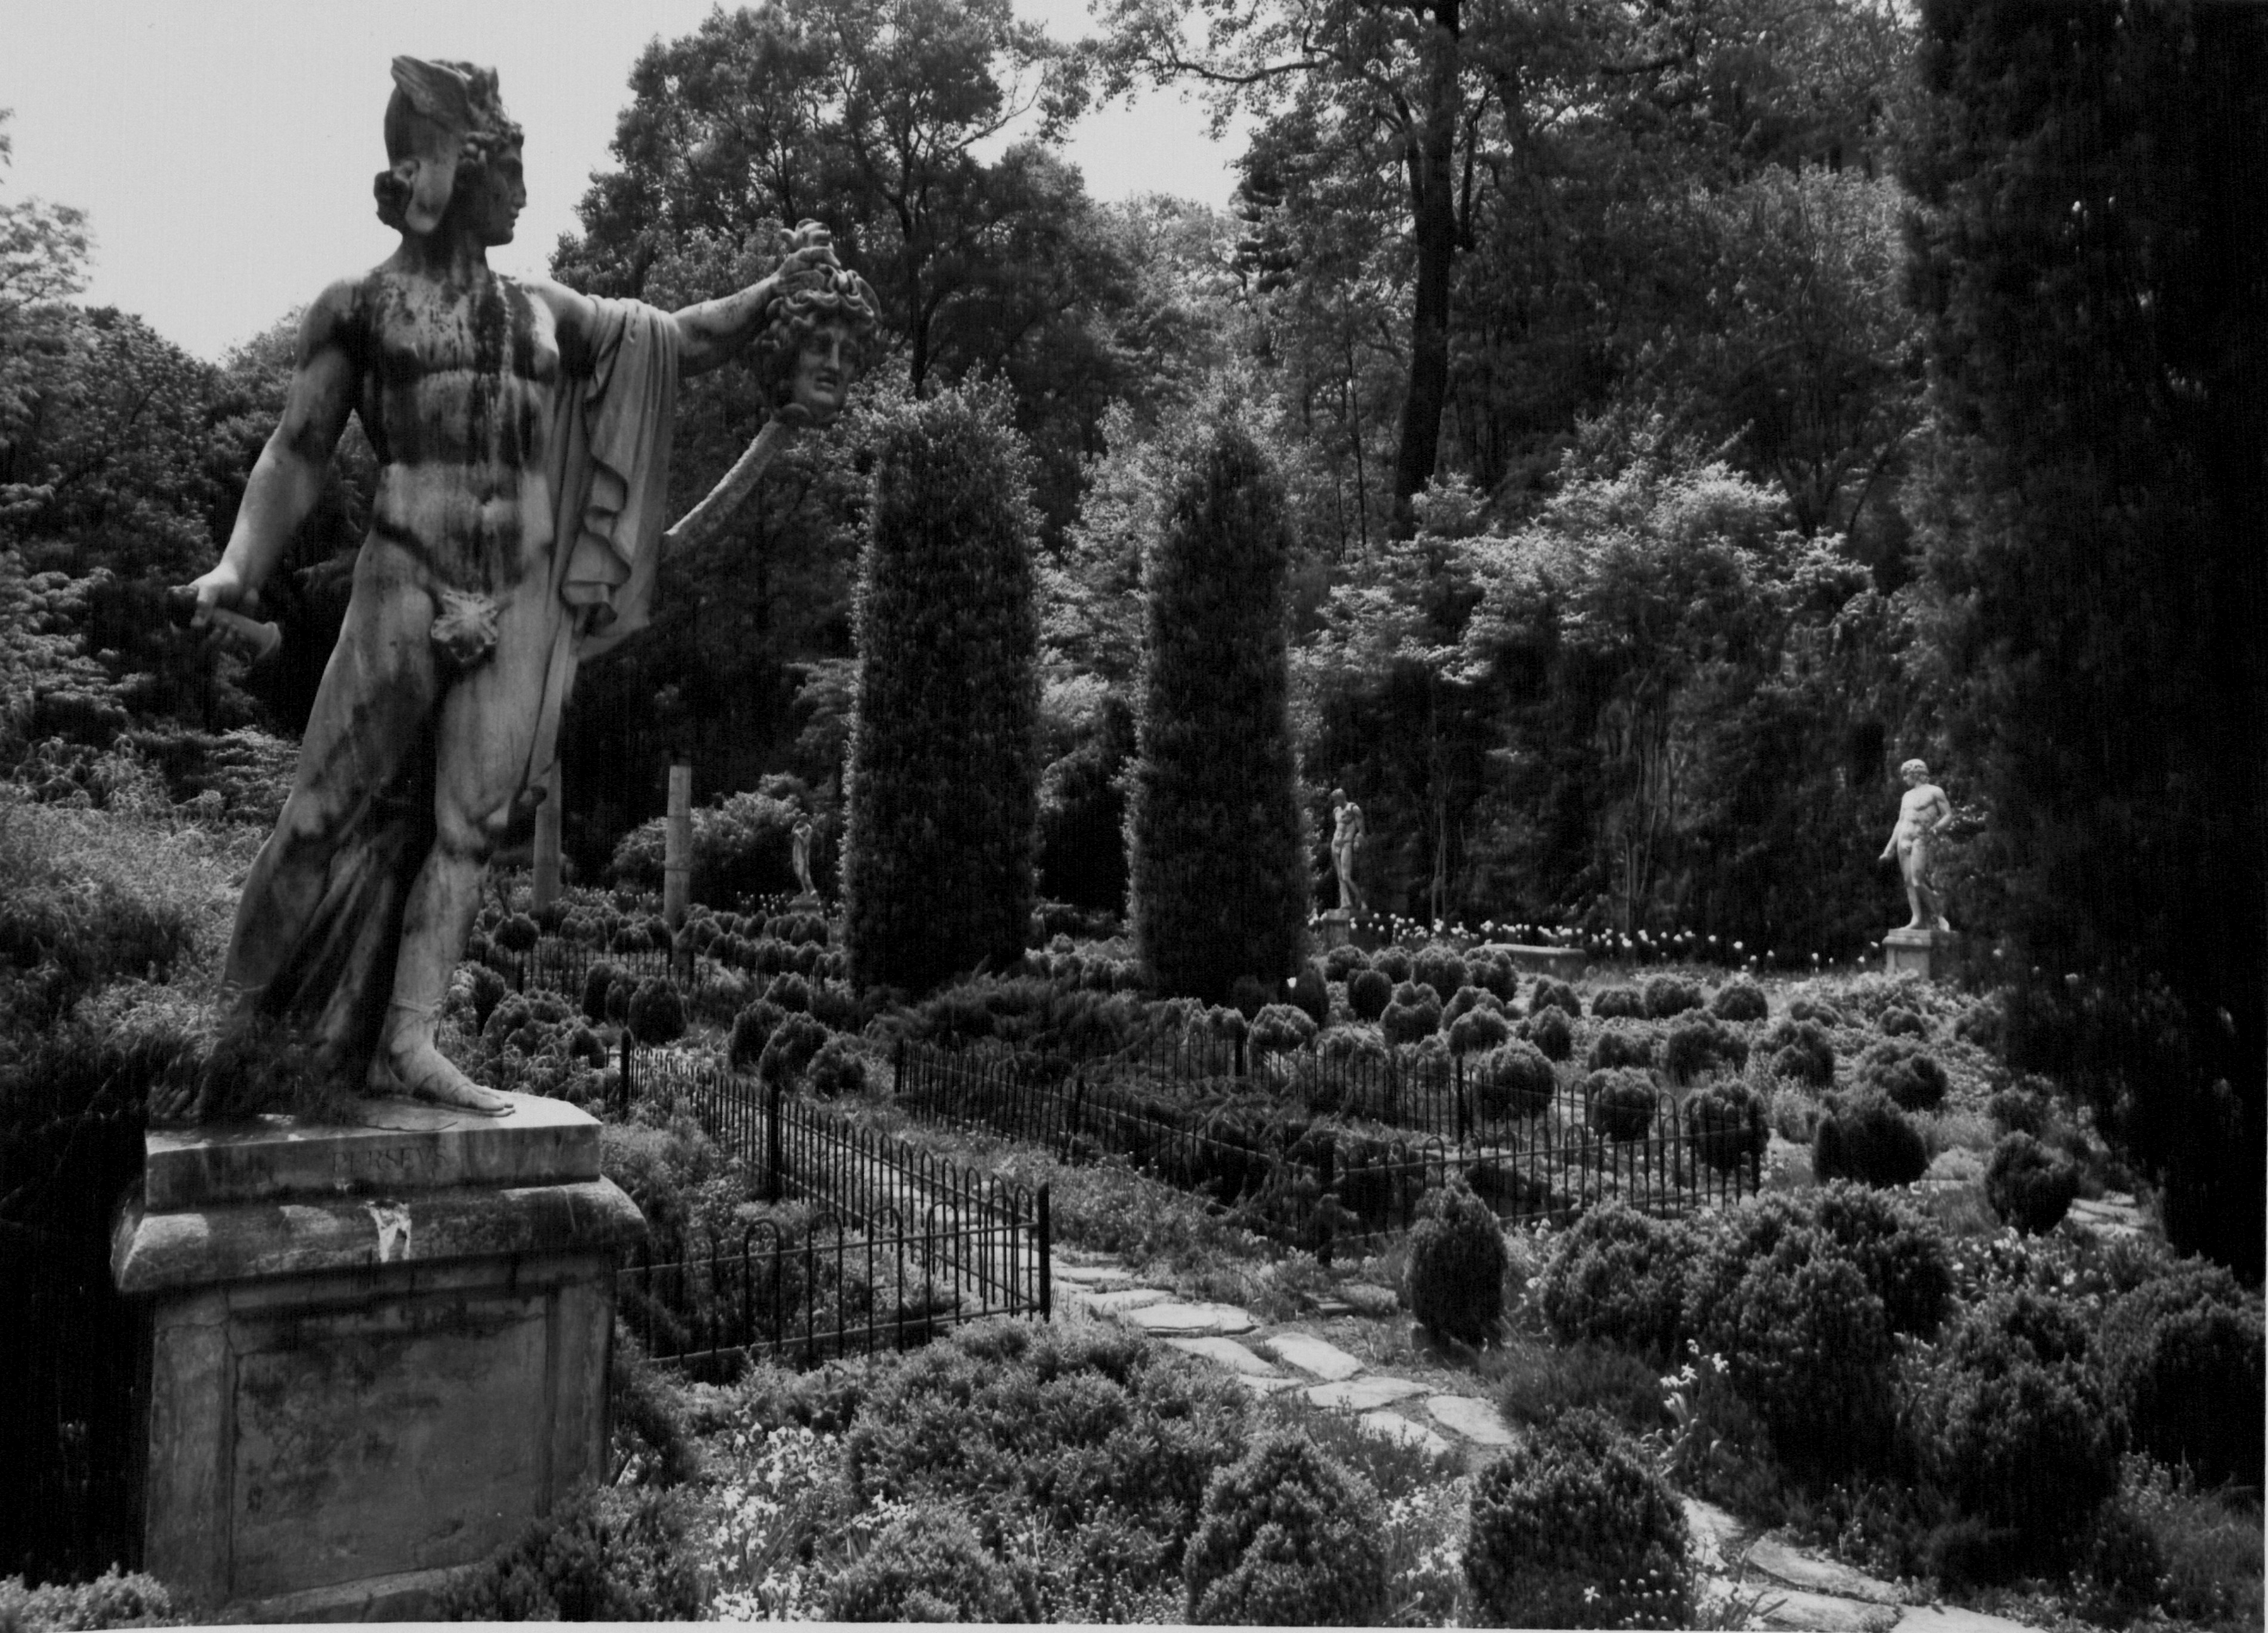 Black and white image of a large formal garden and statuary